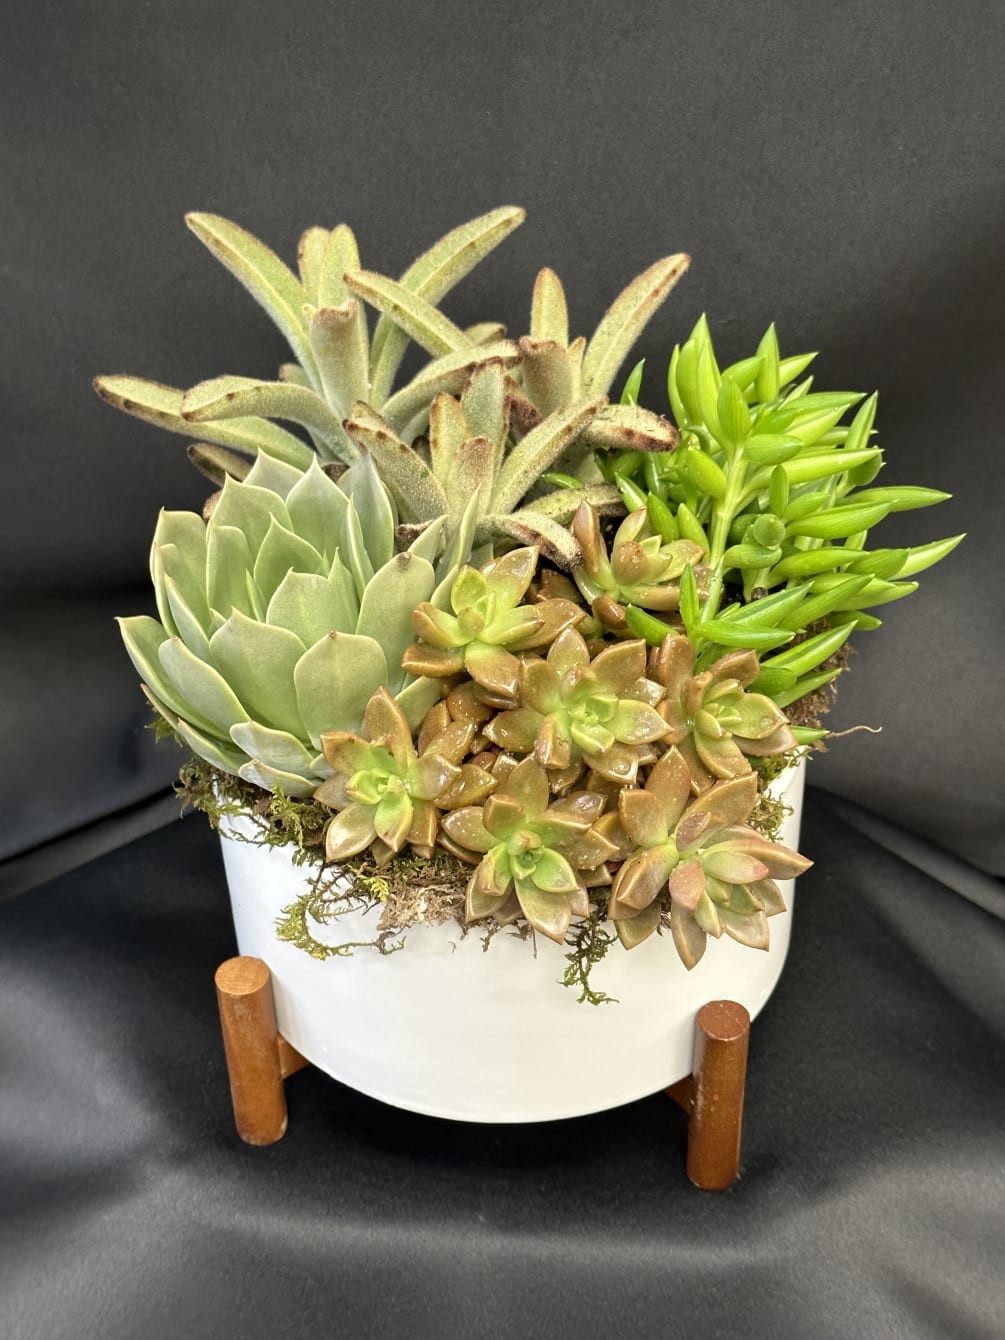 Colorful succulents planted in a vintage inspired ceramic bowl on a wood